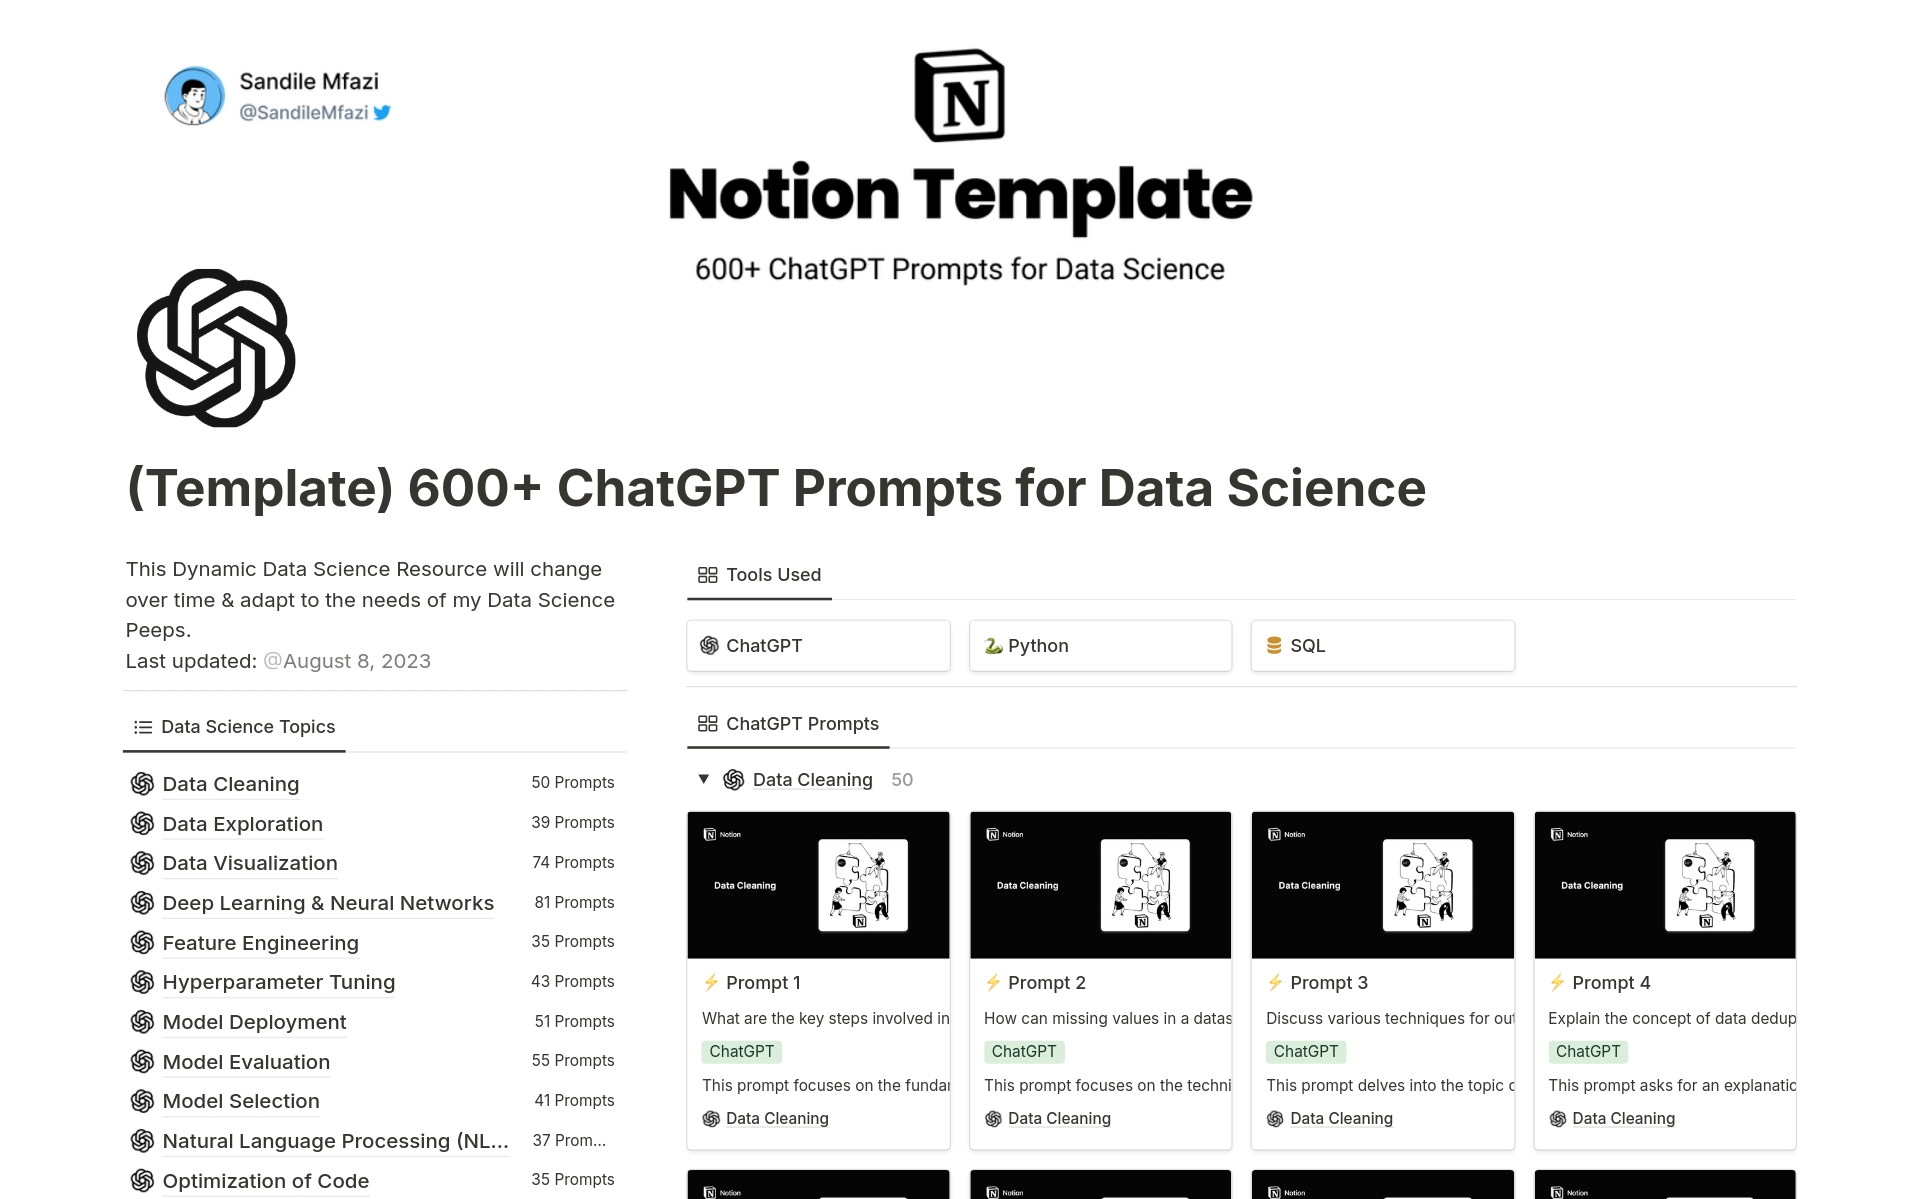 A template preview for 600+ ChatGPT Data Science Prompts